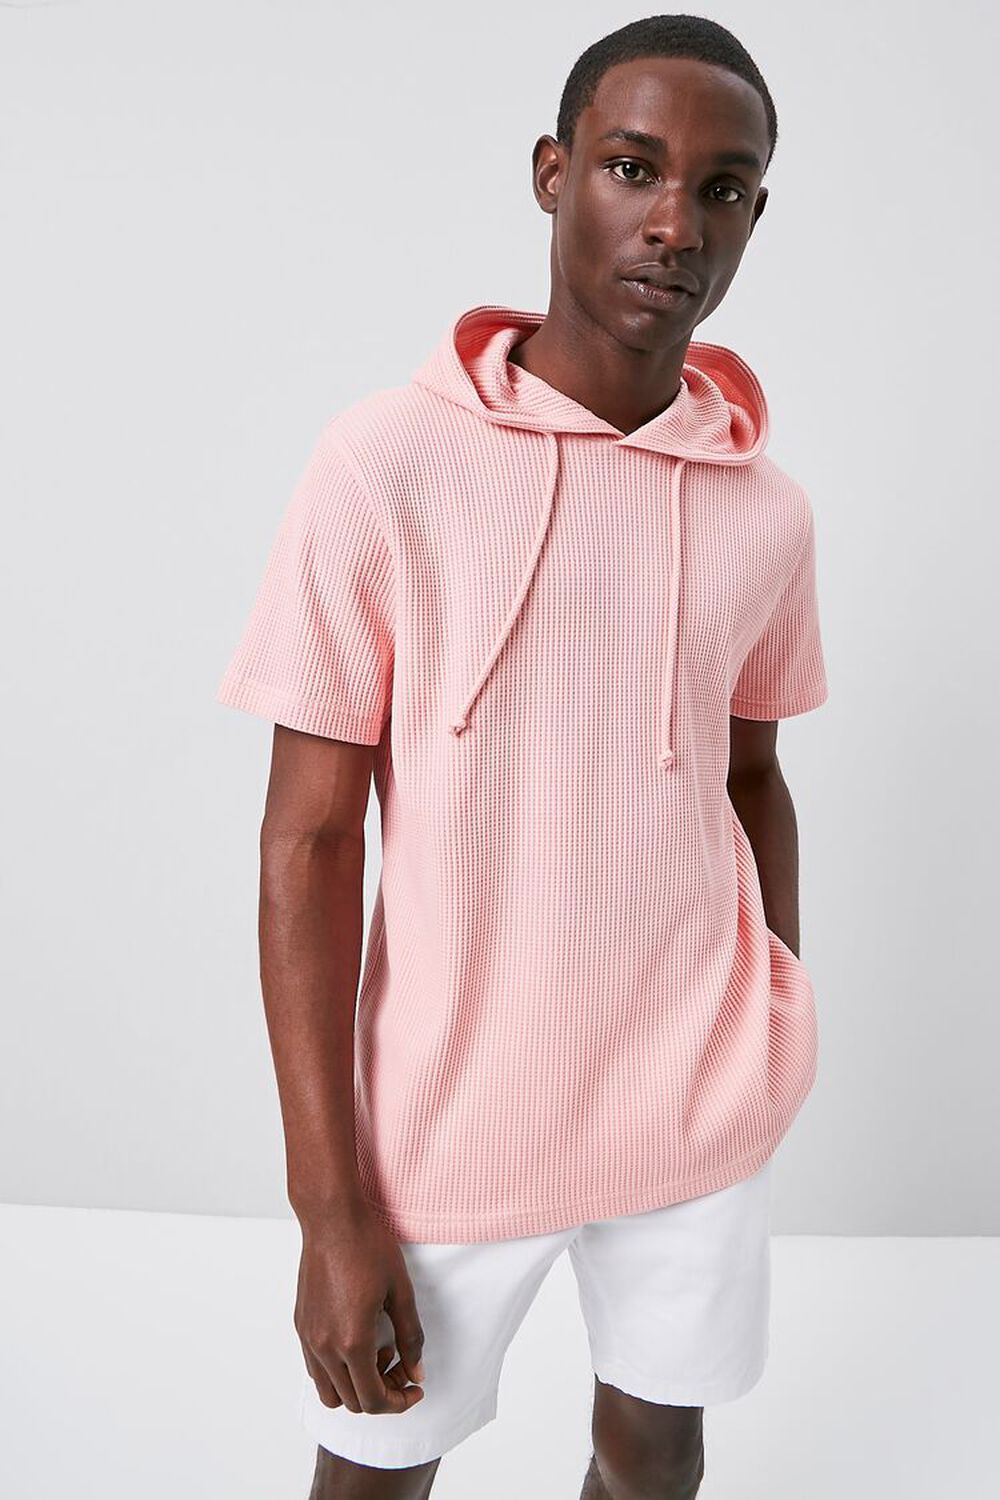 PINK Ribbed Knit Hooded Top, image 1